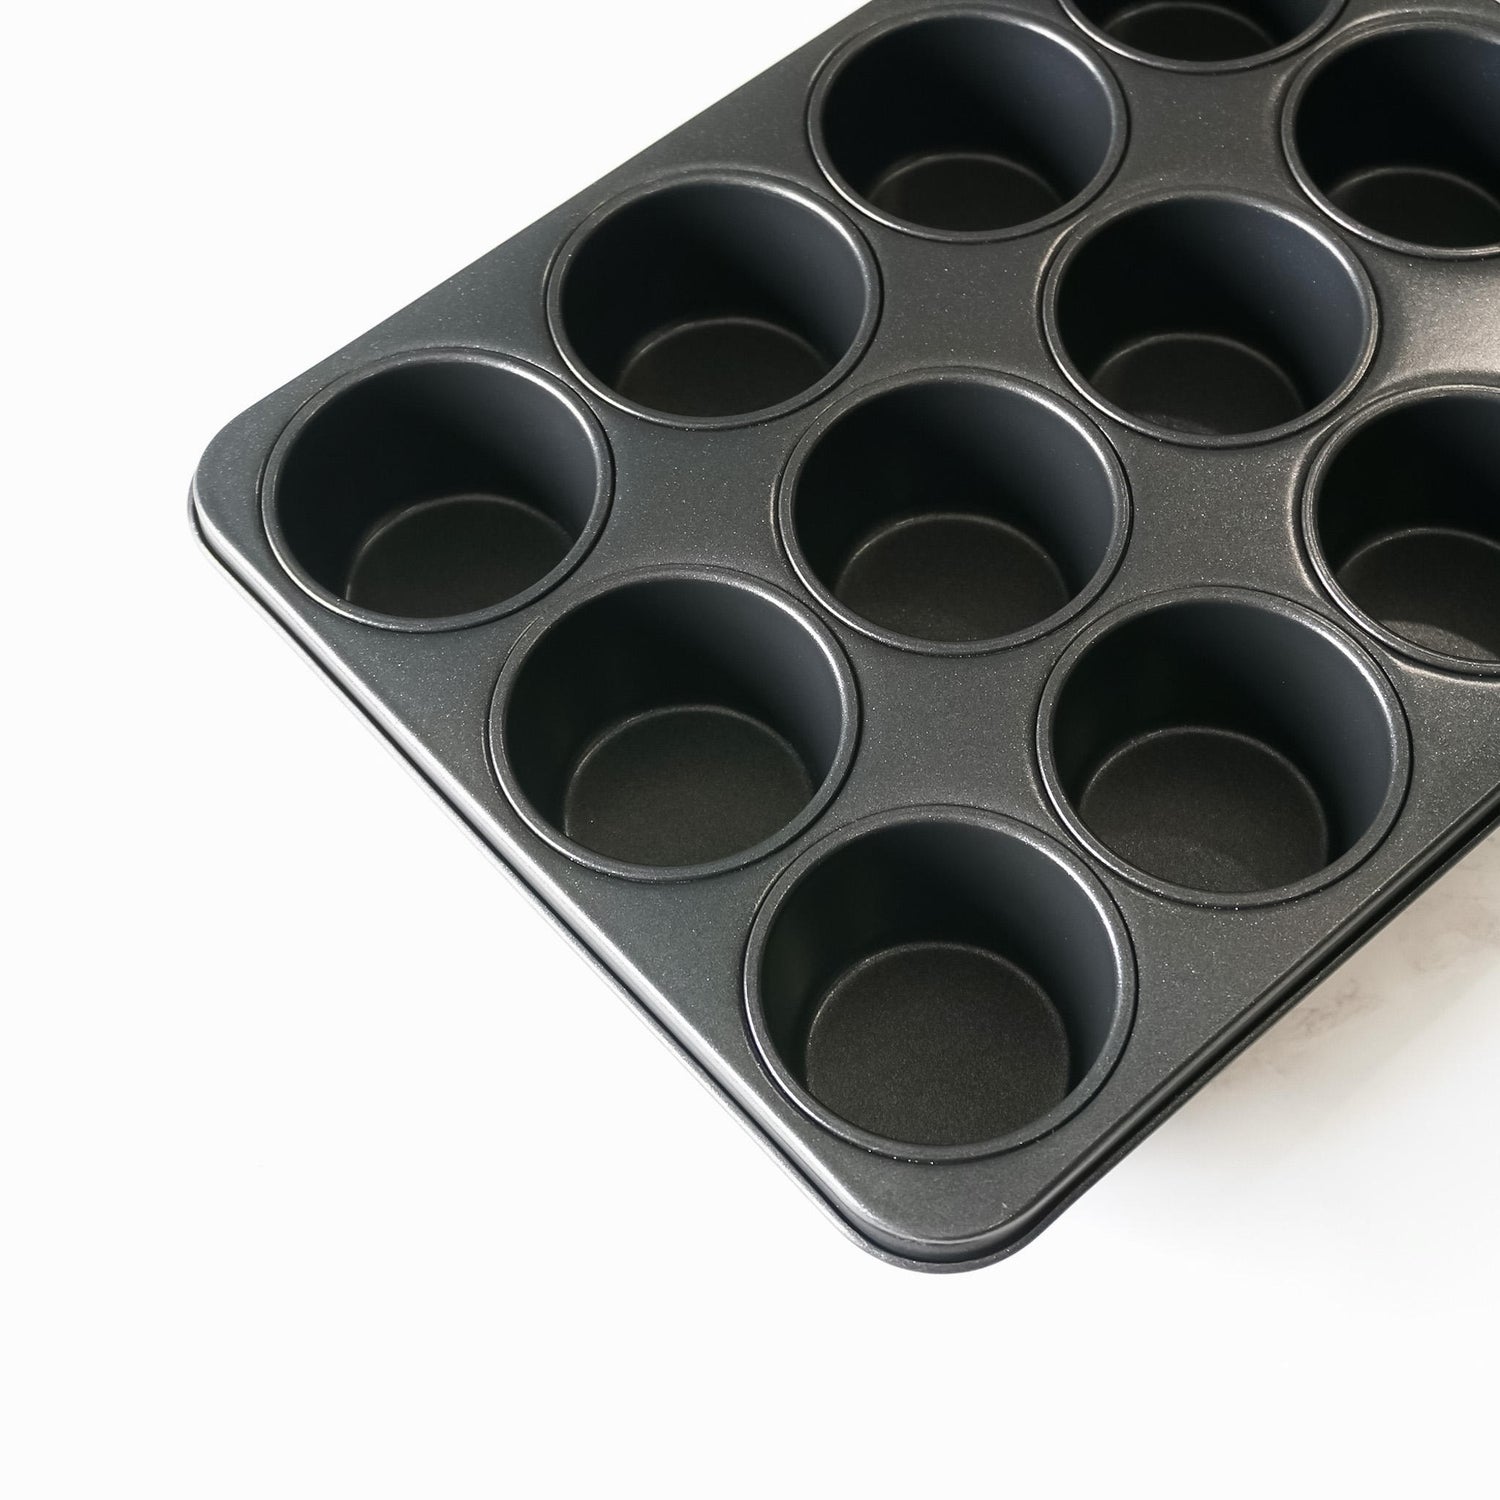  Commercial Bakeware Large Muffin Pan, 12-Cup